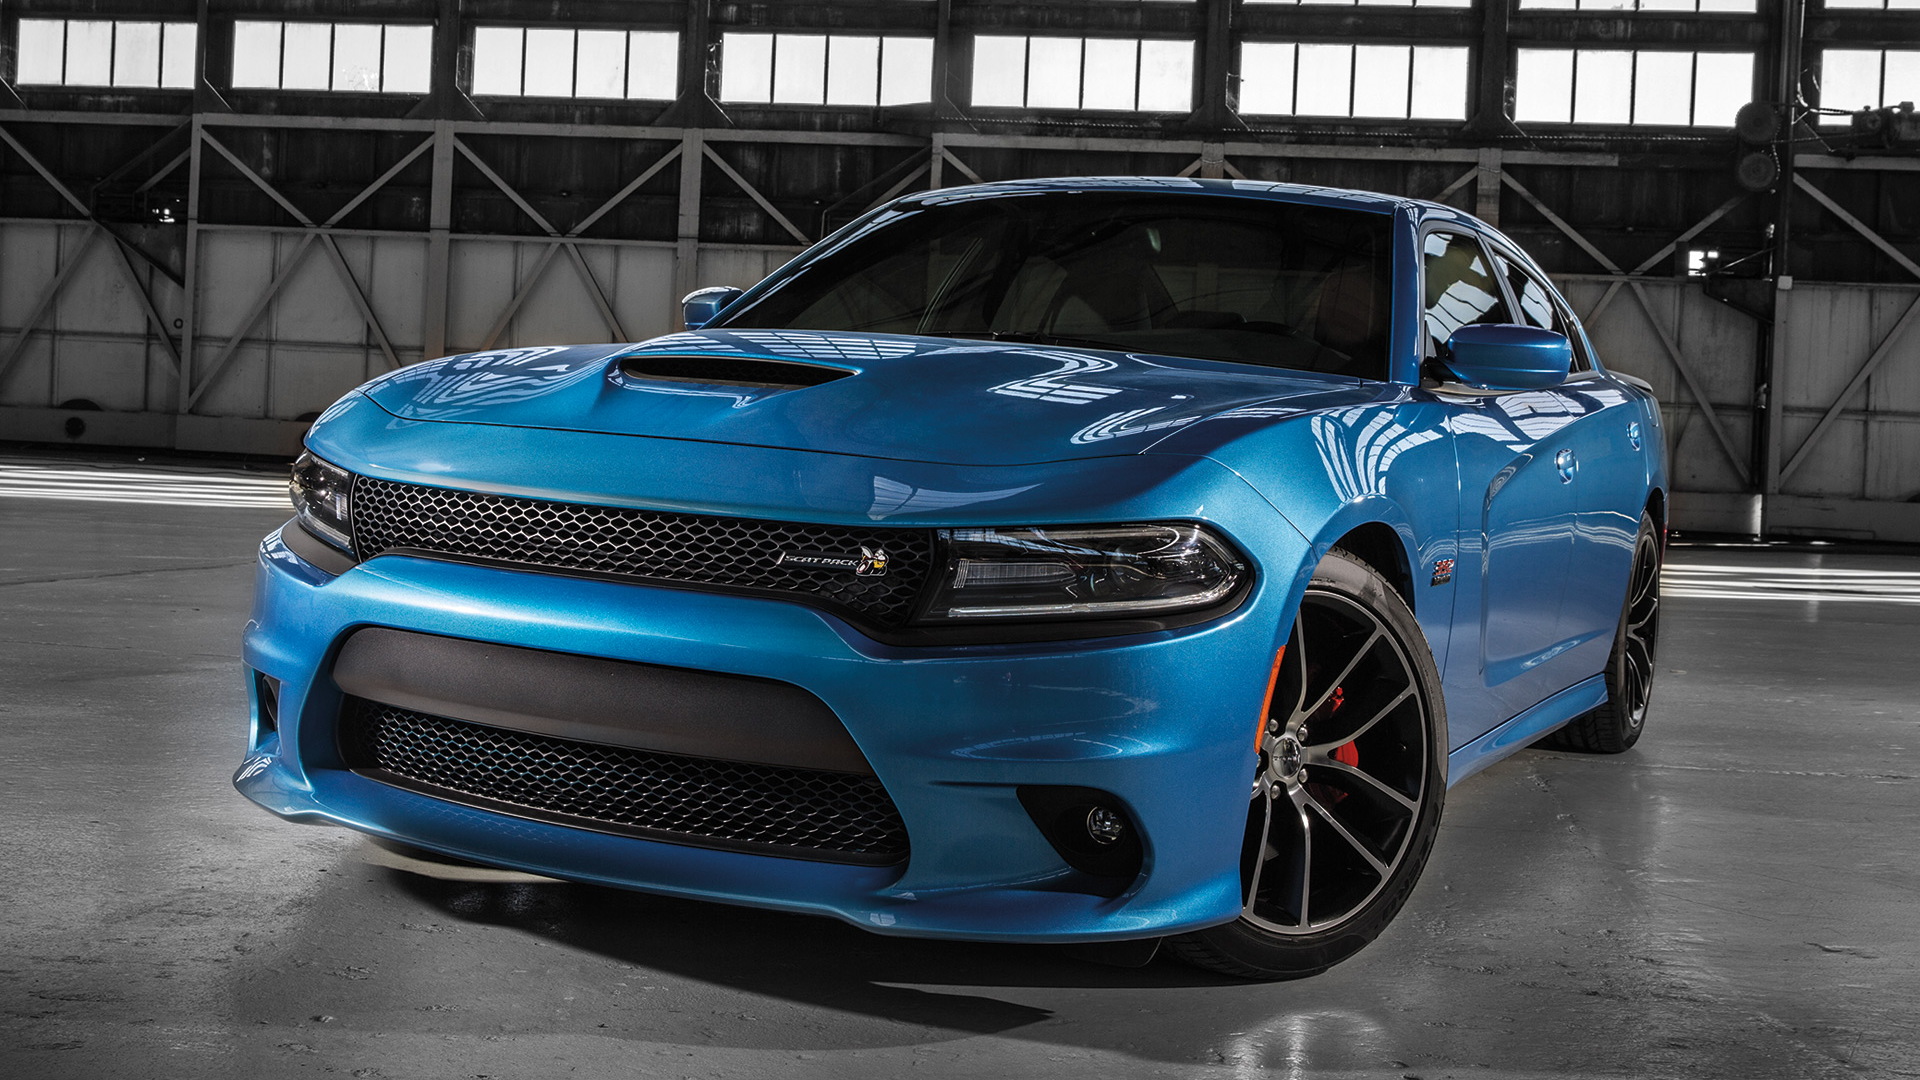 2018 Dodge Charger in B5 Blue